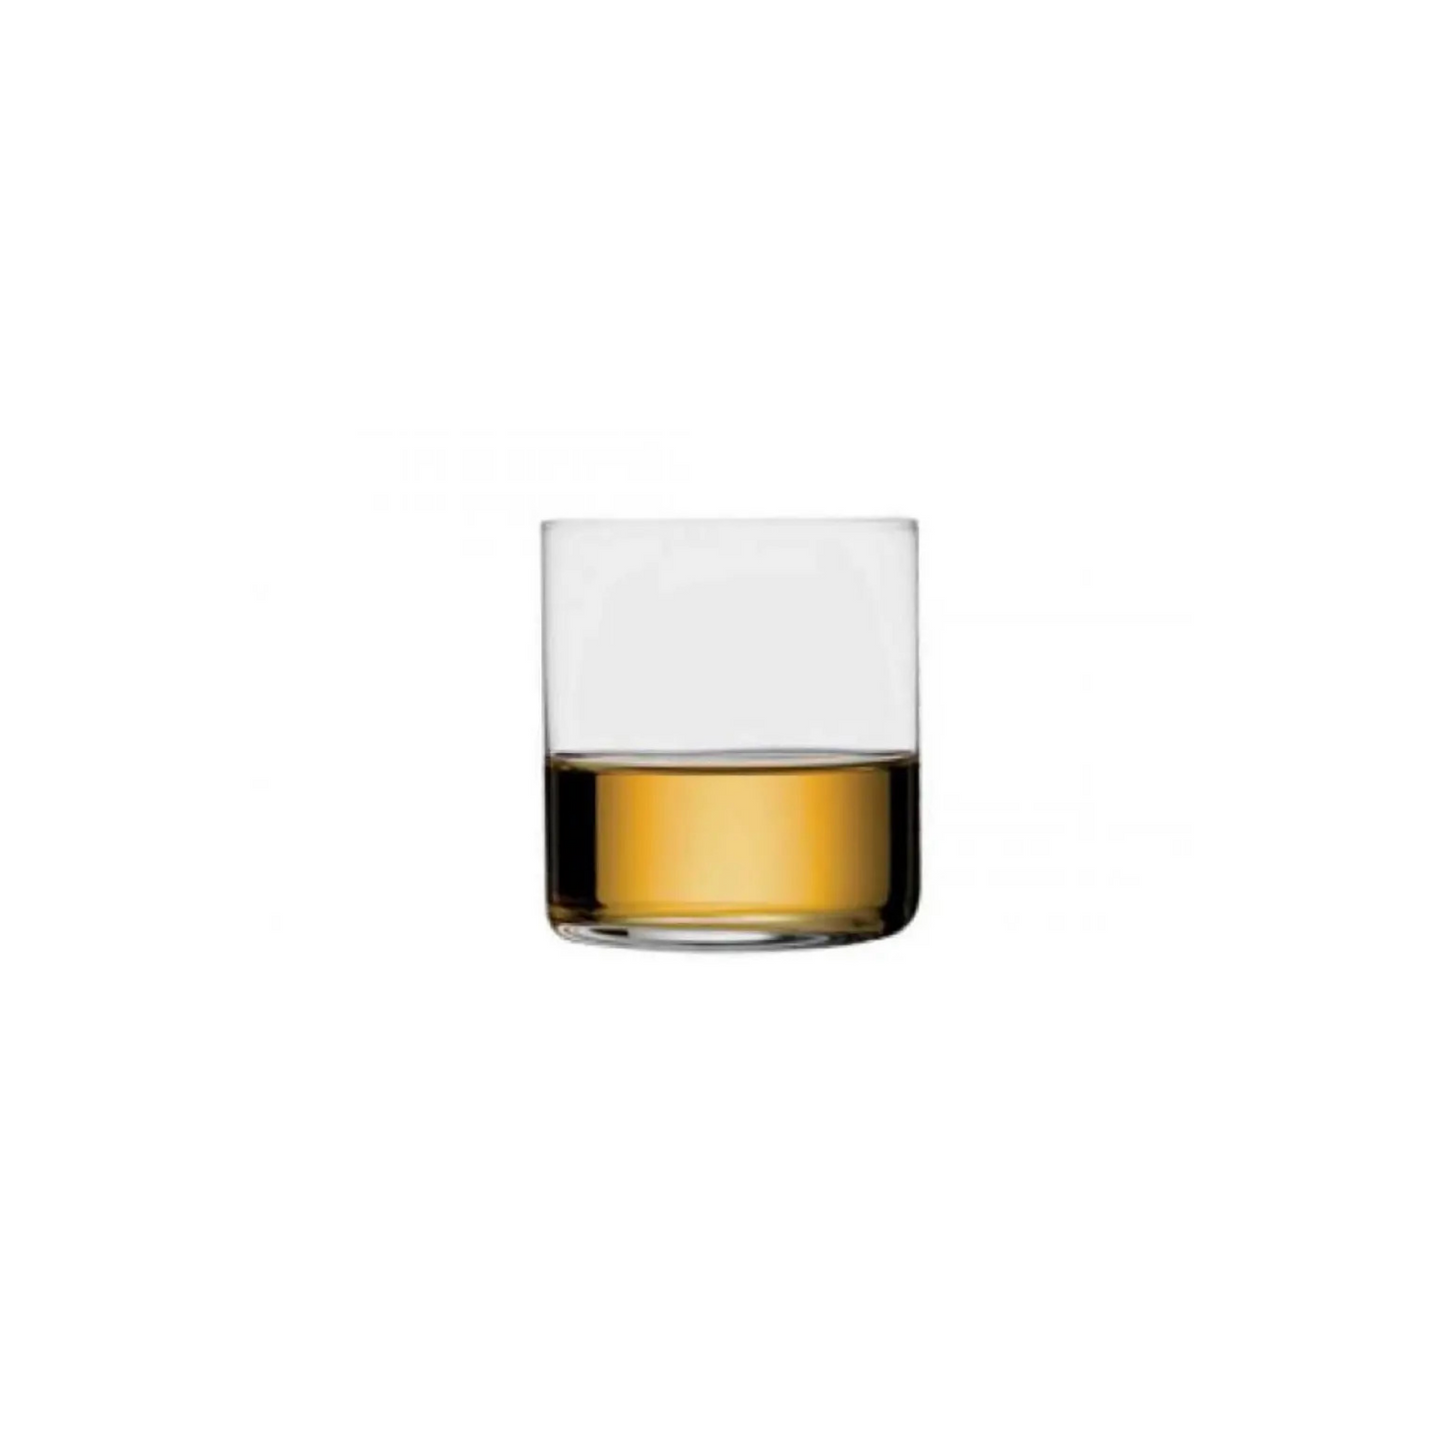 Whisky Glass Finesse Lille 4 stk. - Glasglowe